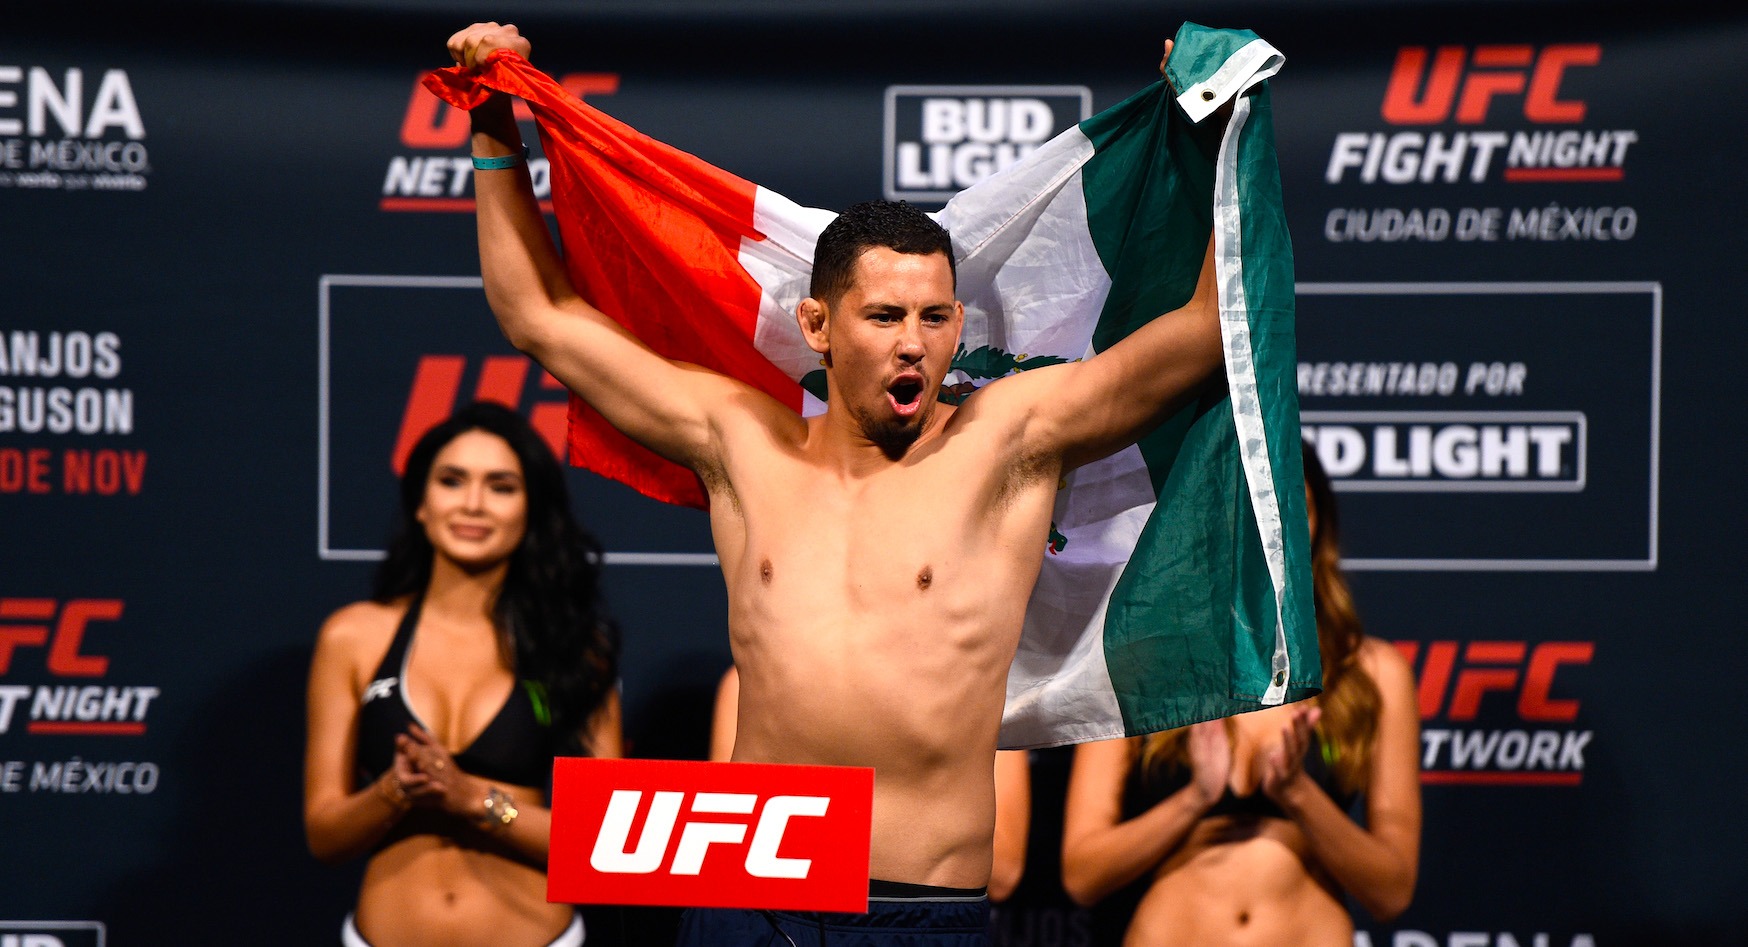 MEXICO CITY, MEXICO - NOVEMBER 04:  Martin Bravo Flores of Mexico steps onto the scale during the UFC weigh-in at the Arena Ciudad de Mexico on November 4, 2016 in Mexico City, Mexico. (Photo by Jeff Bottari/Zuffa LLC/Zuffa LLC via Getty Images)